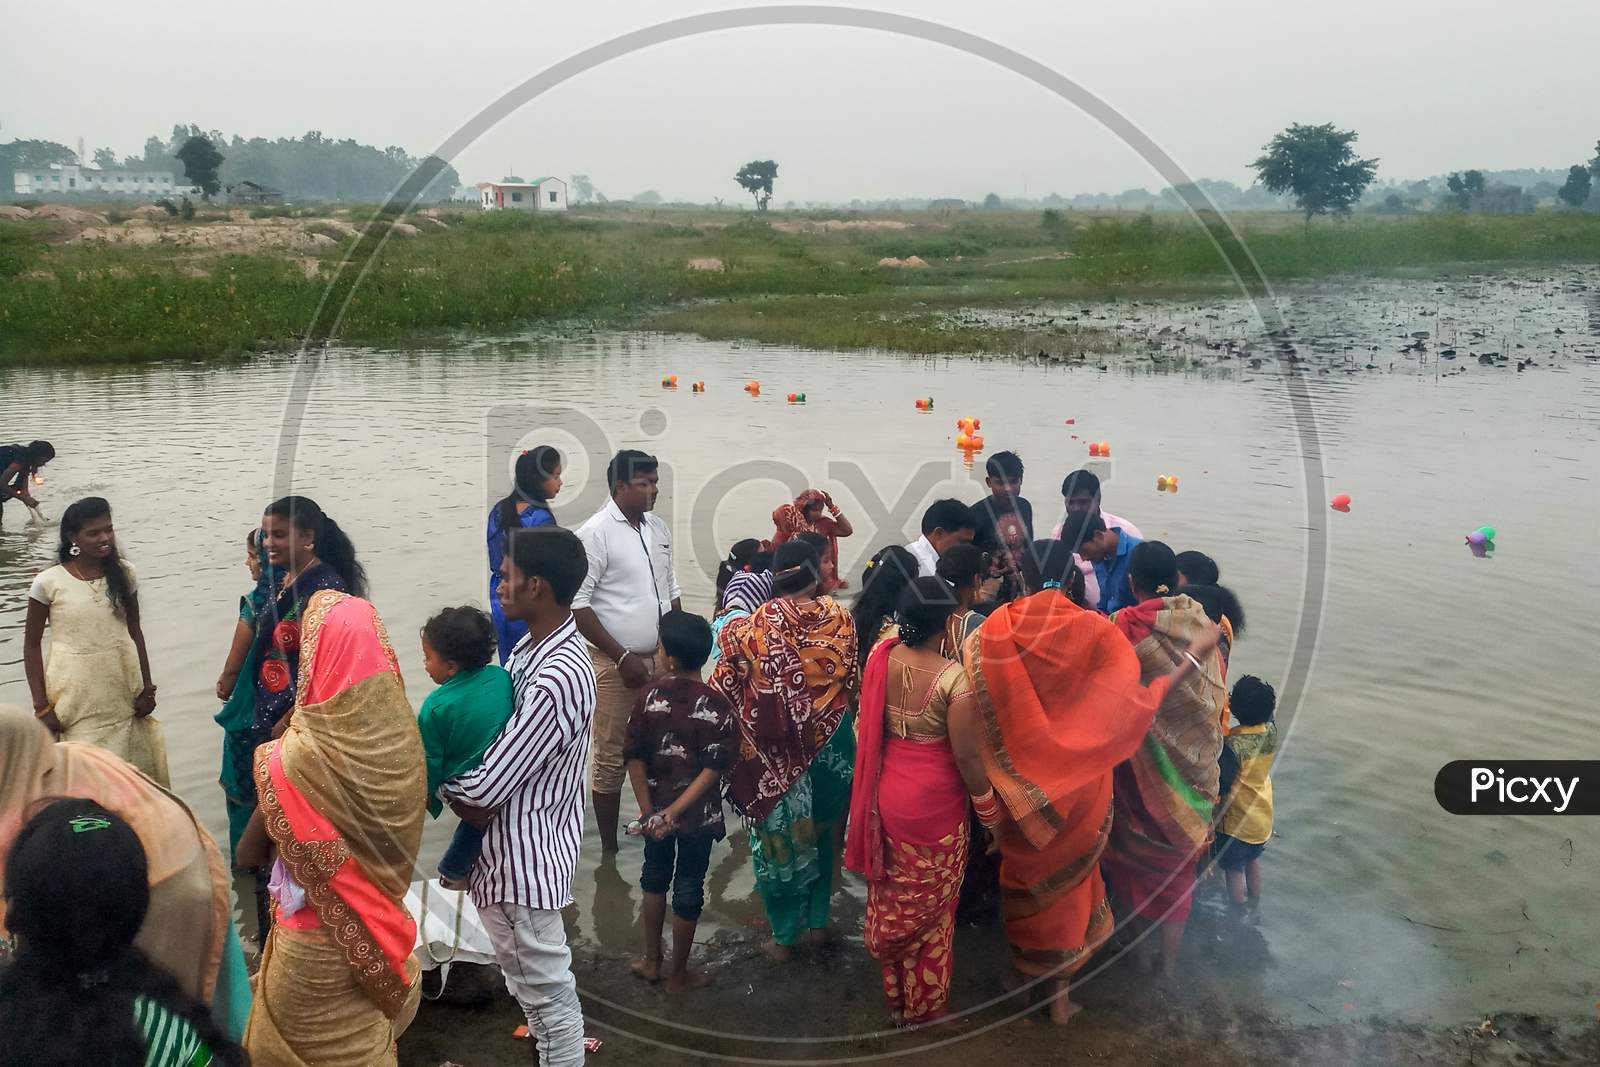 A group of people is celebrating the Chhath Puja